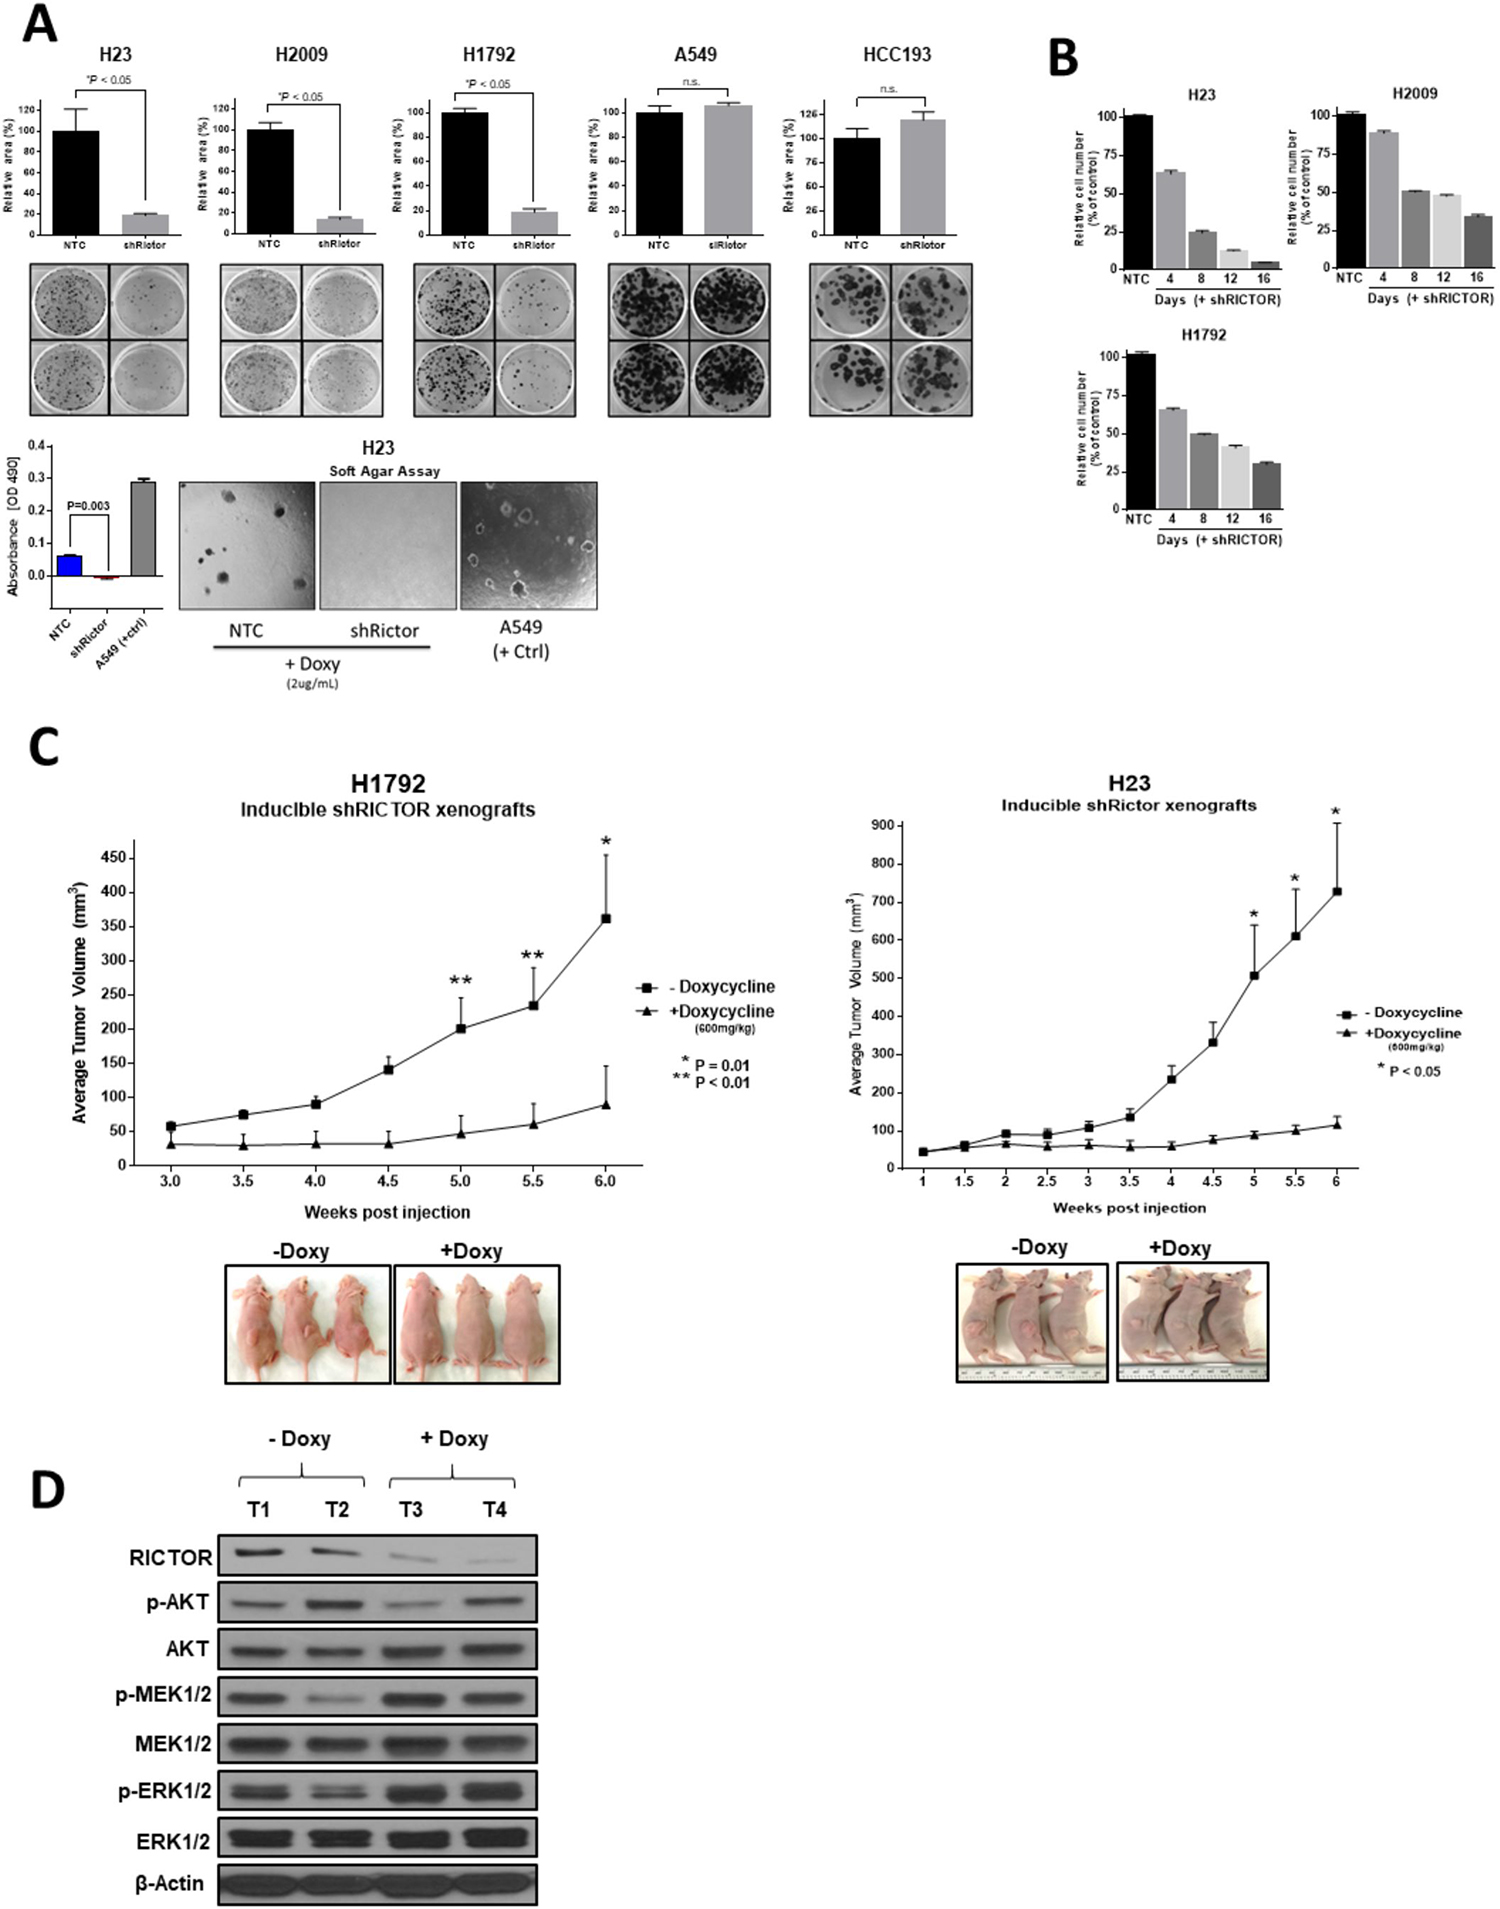 RICTOR enhances the malignant phenotype of NSCLC in vitro and in vivo.